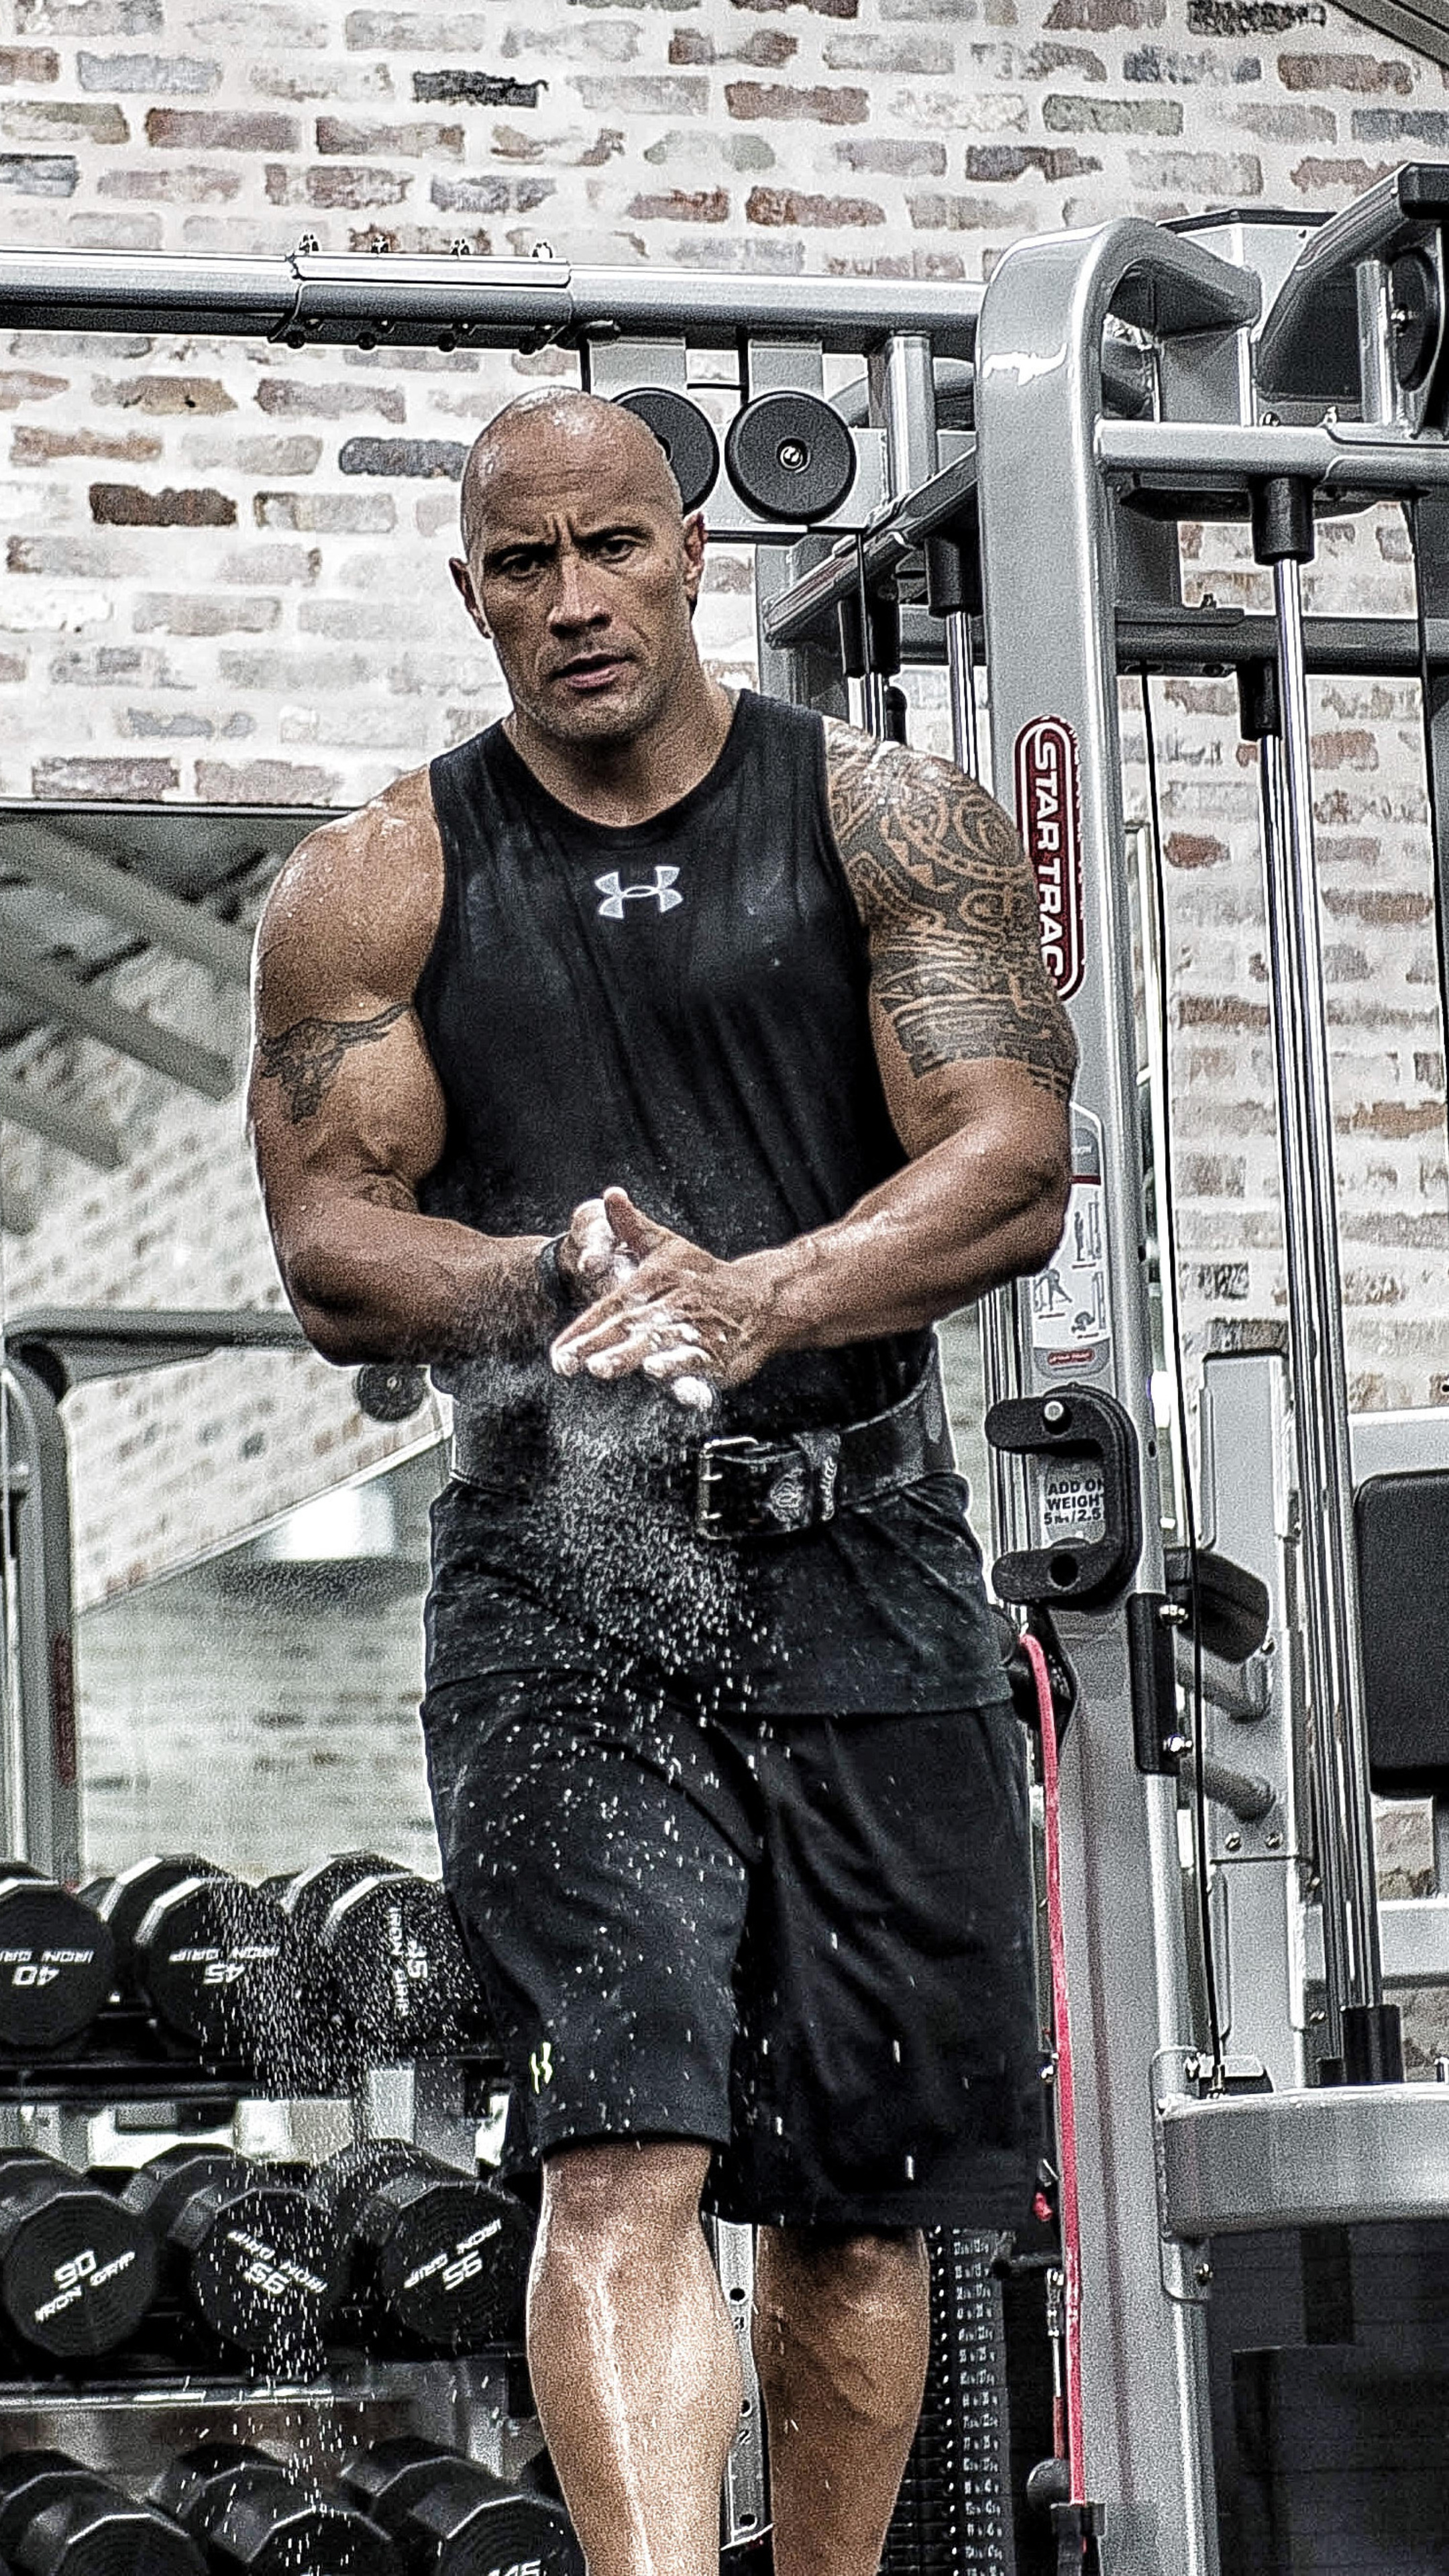 Dwayne Johnson in gym, Sony Xperia HD wallpapers, Bodybuilder physique, Fitness motivation, 2160x3840 4K Handy